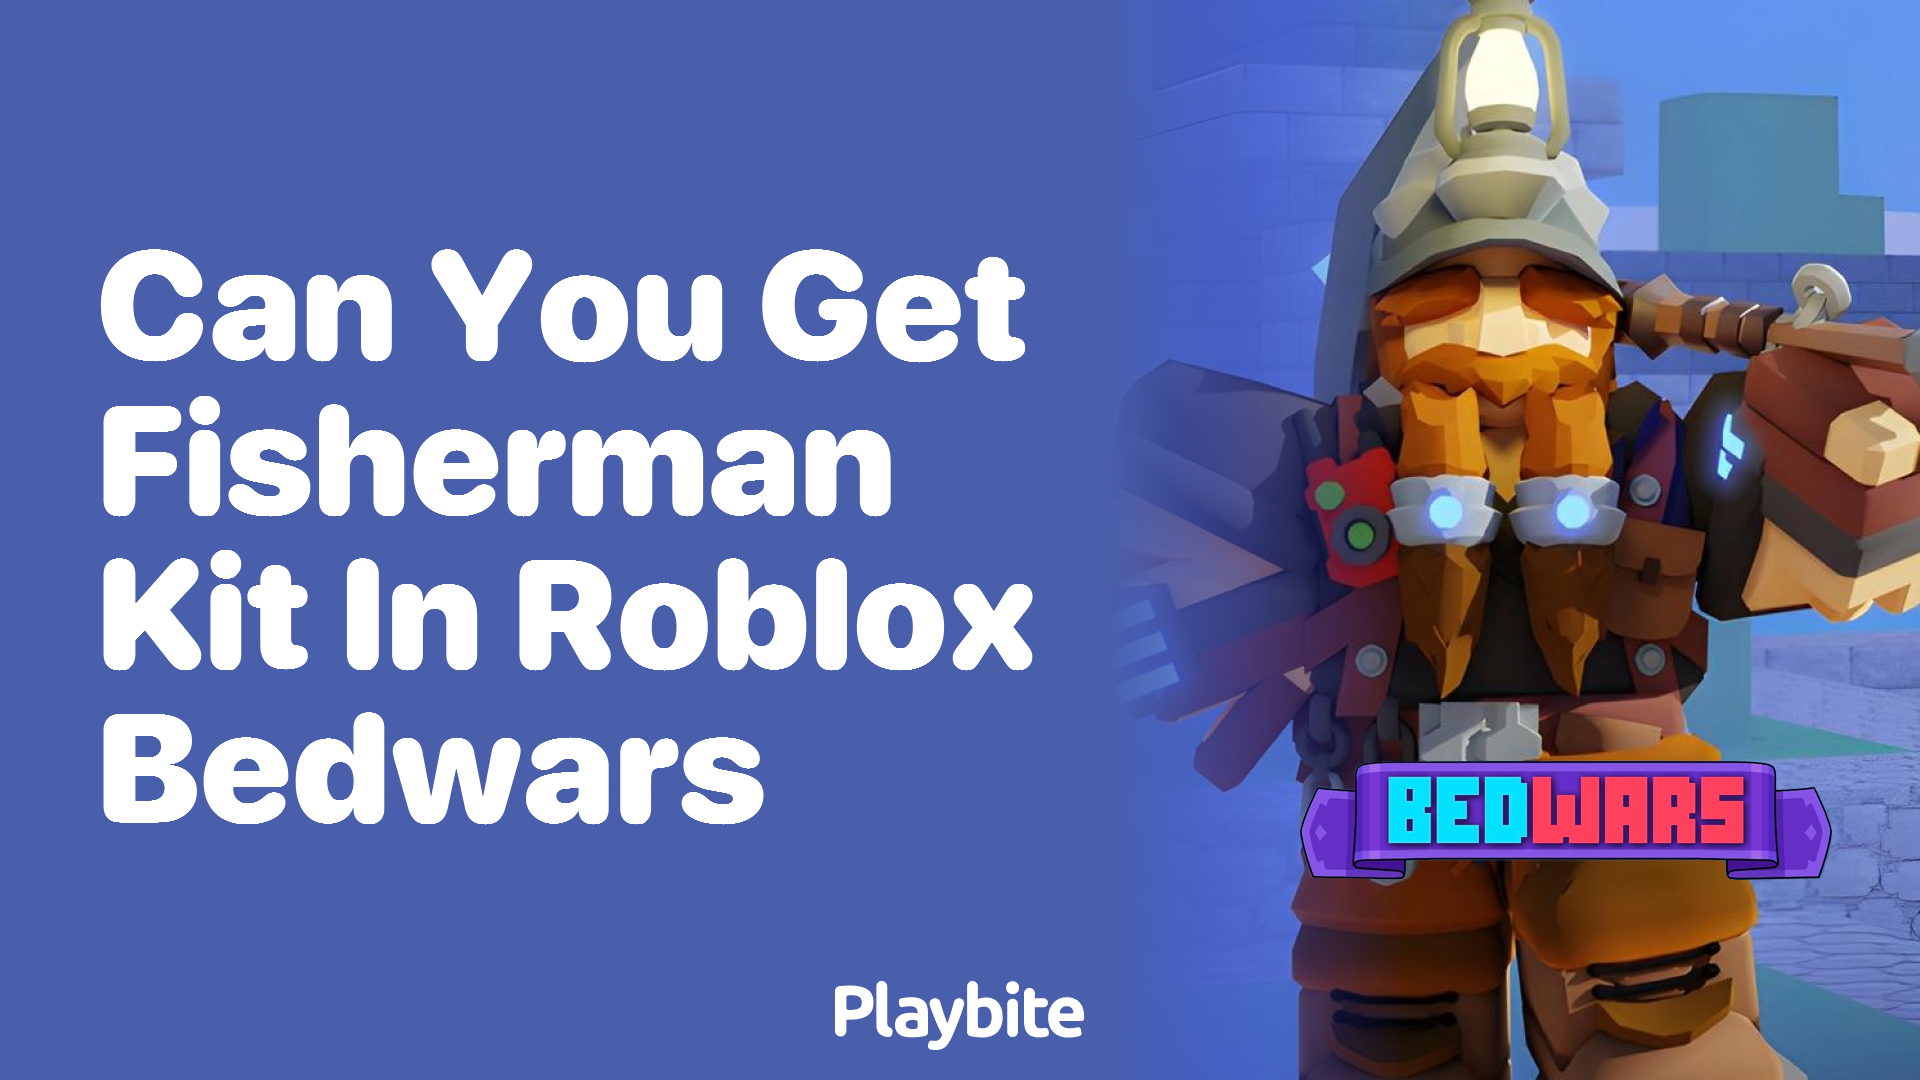 Can You Get the Fisherman Kit in Roblox Bedwars?